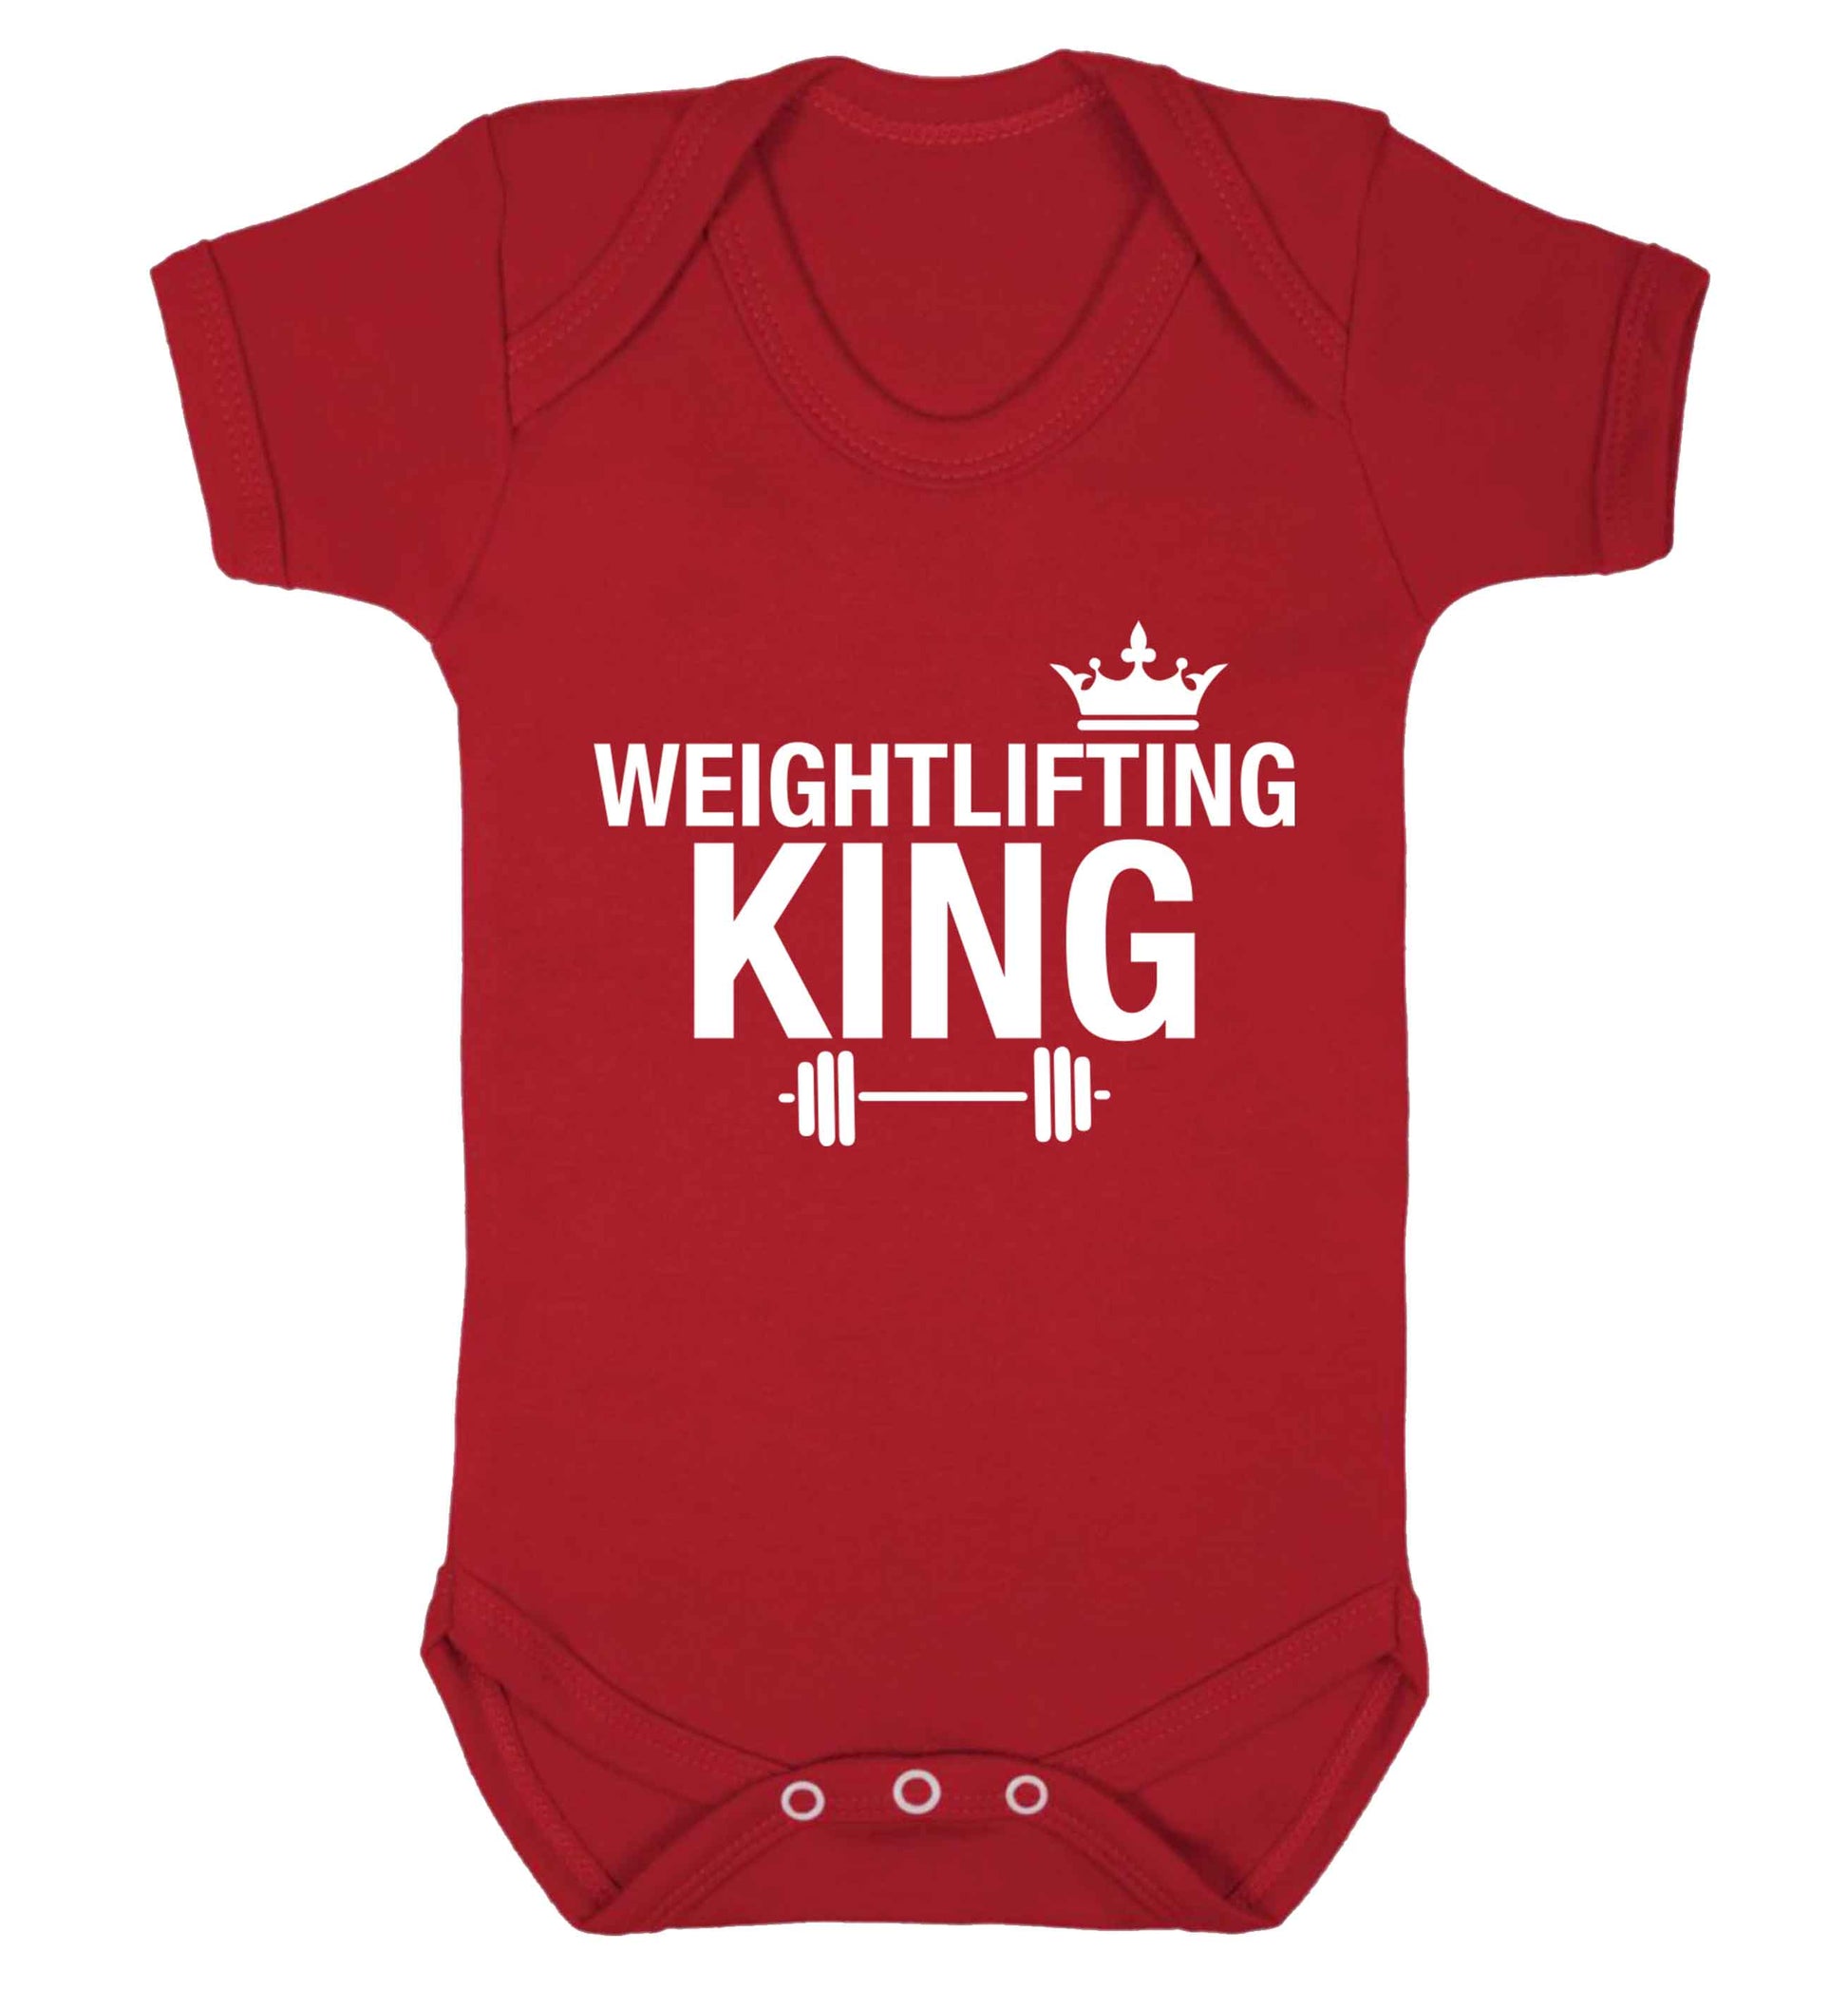 Weightlifting king Baby Vest red 18-24 months